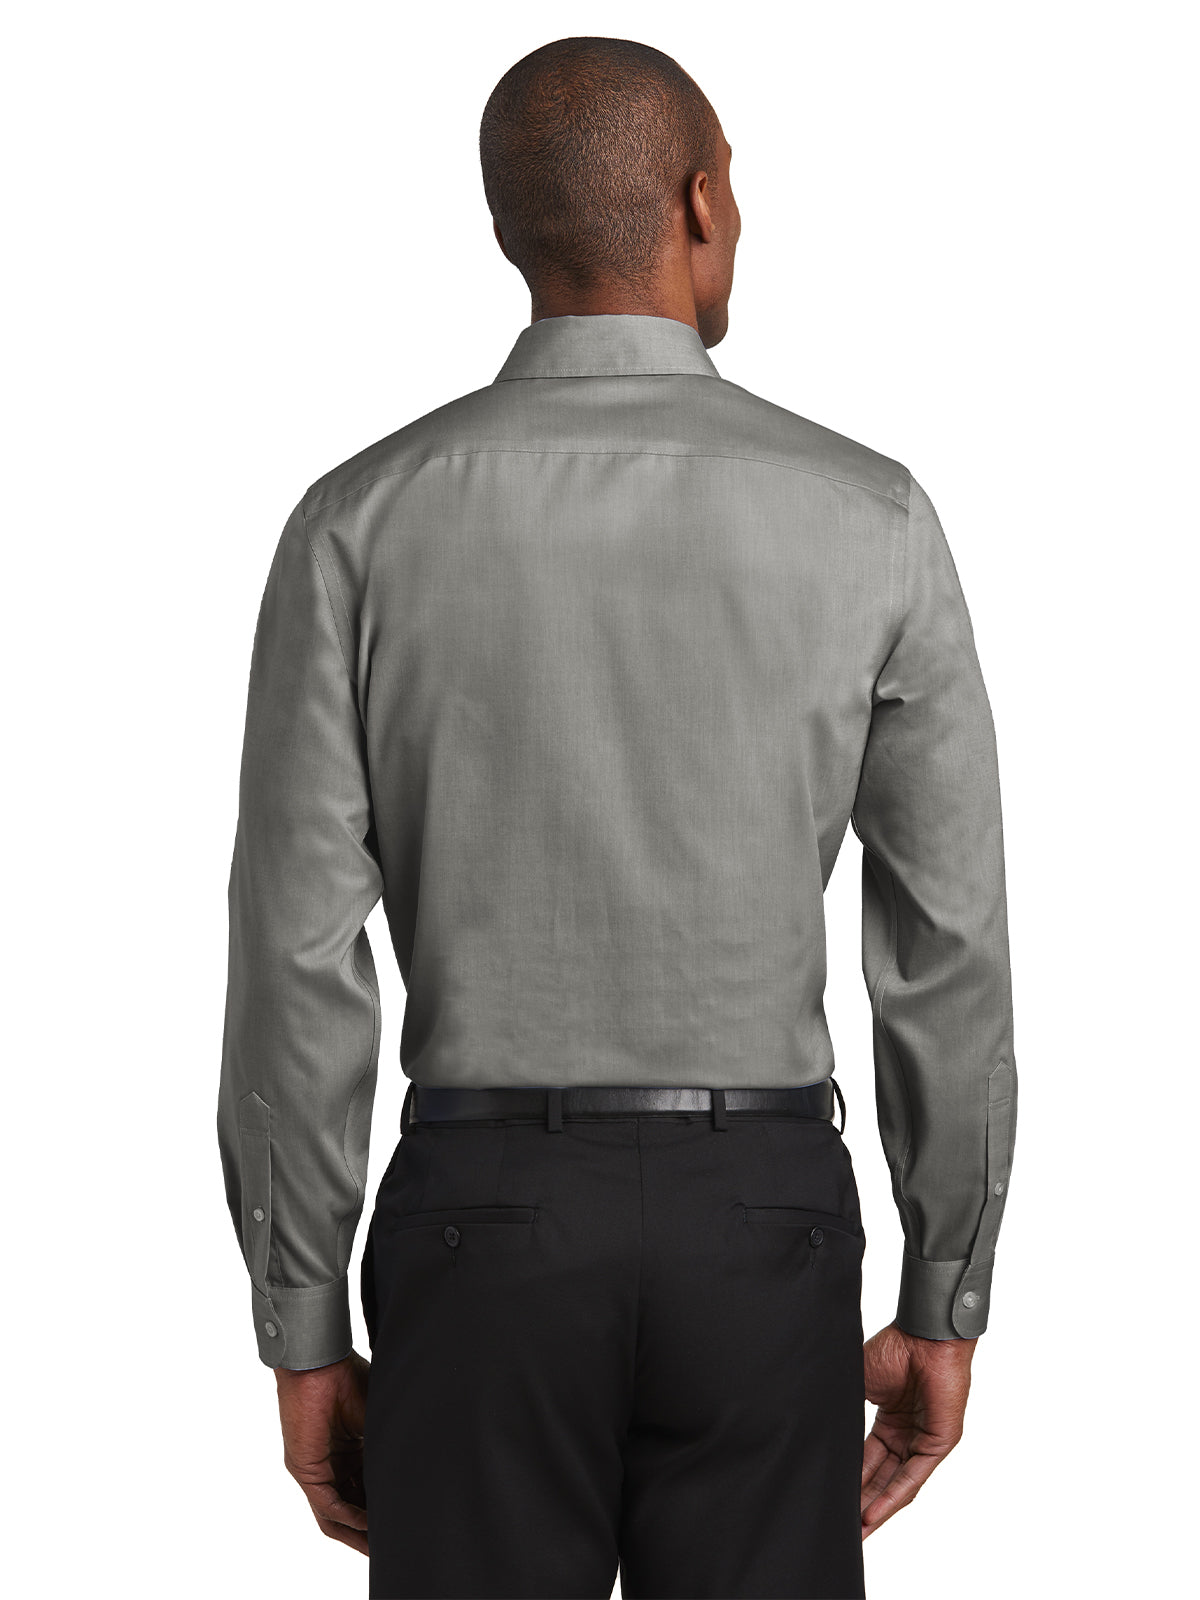 Slim Fit Pinpoint Oxford Non-Iron Shirt